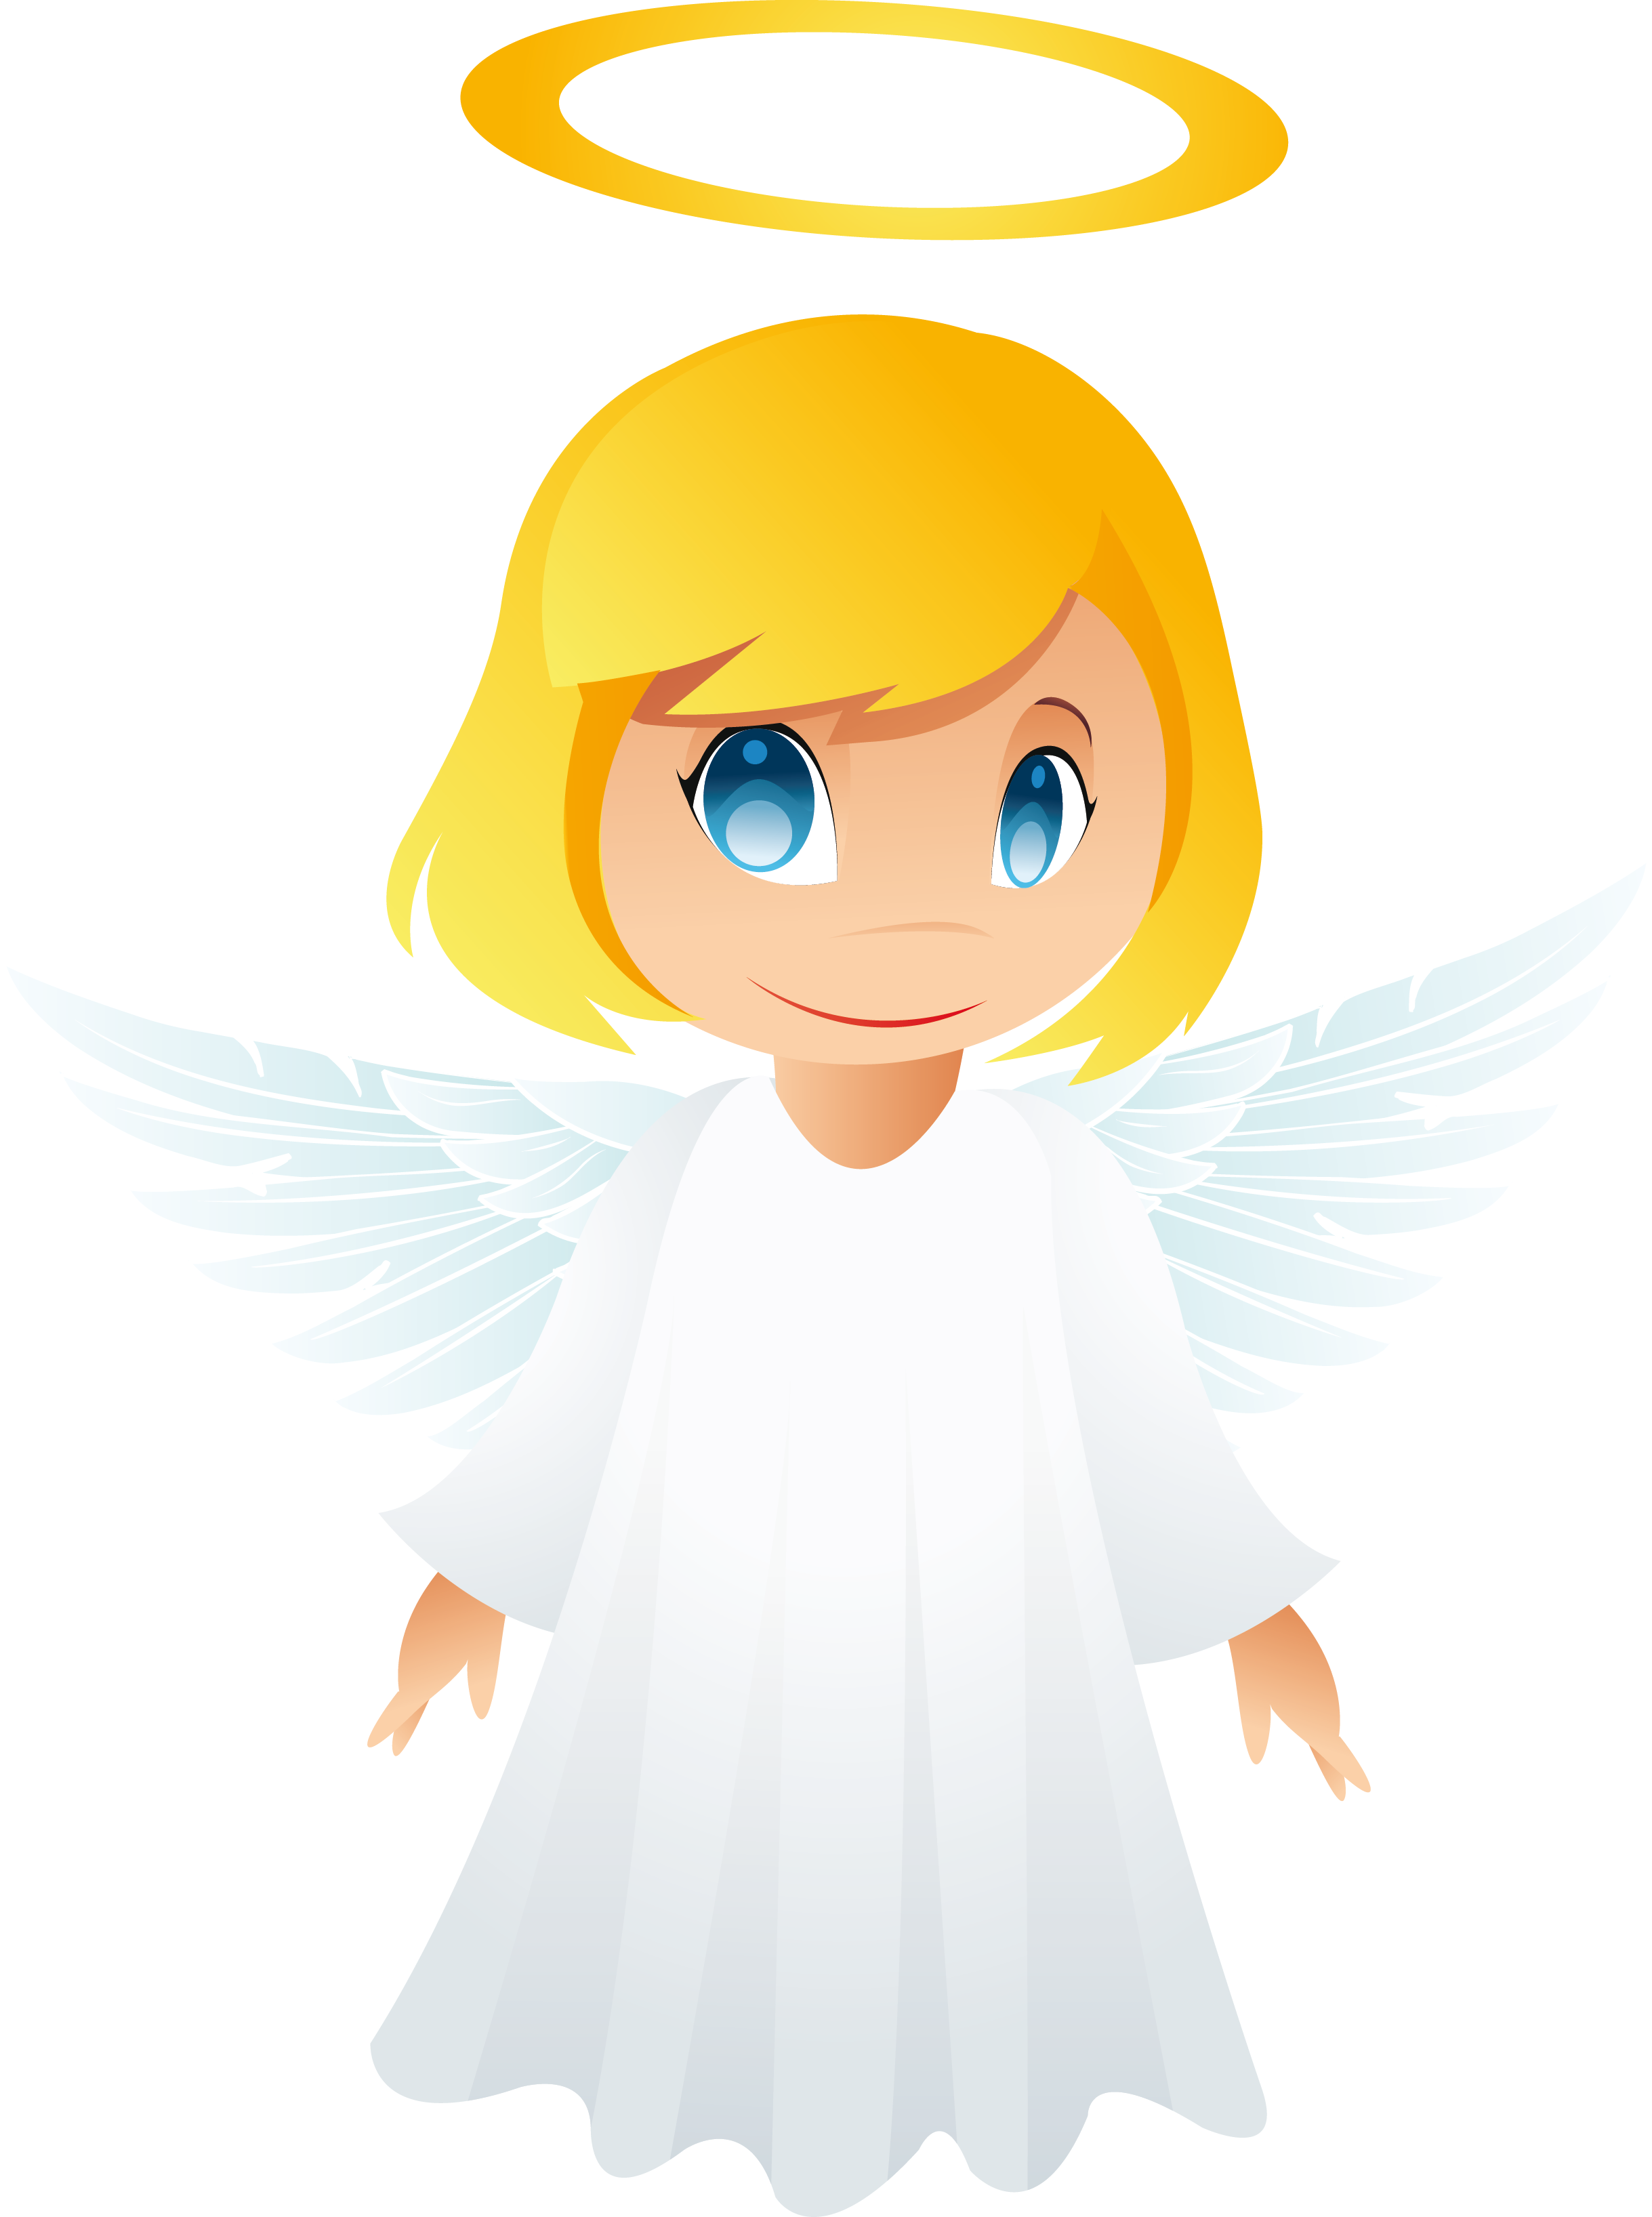 Angel pictures clip art